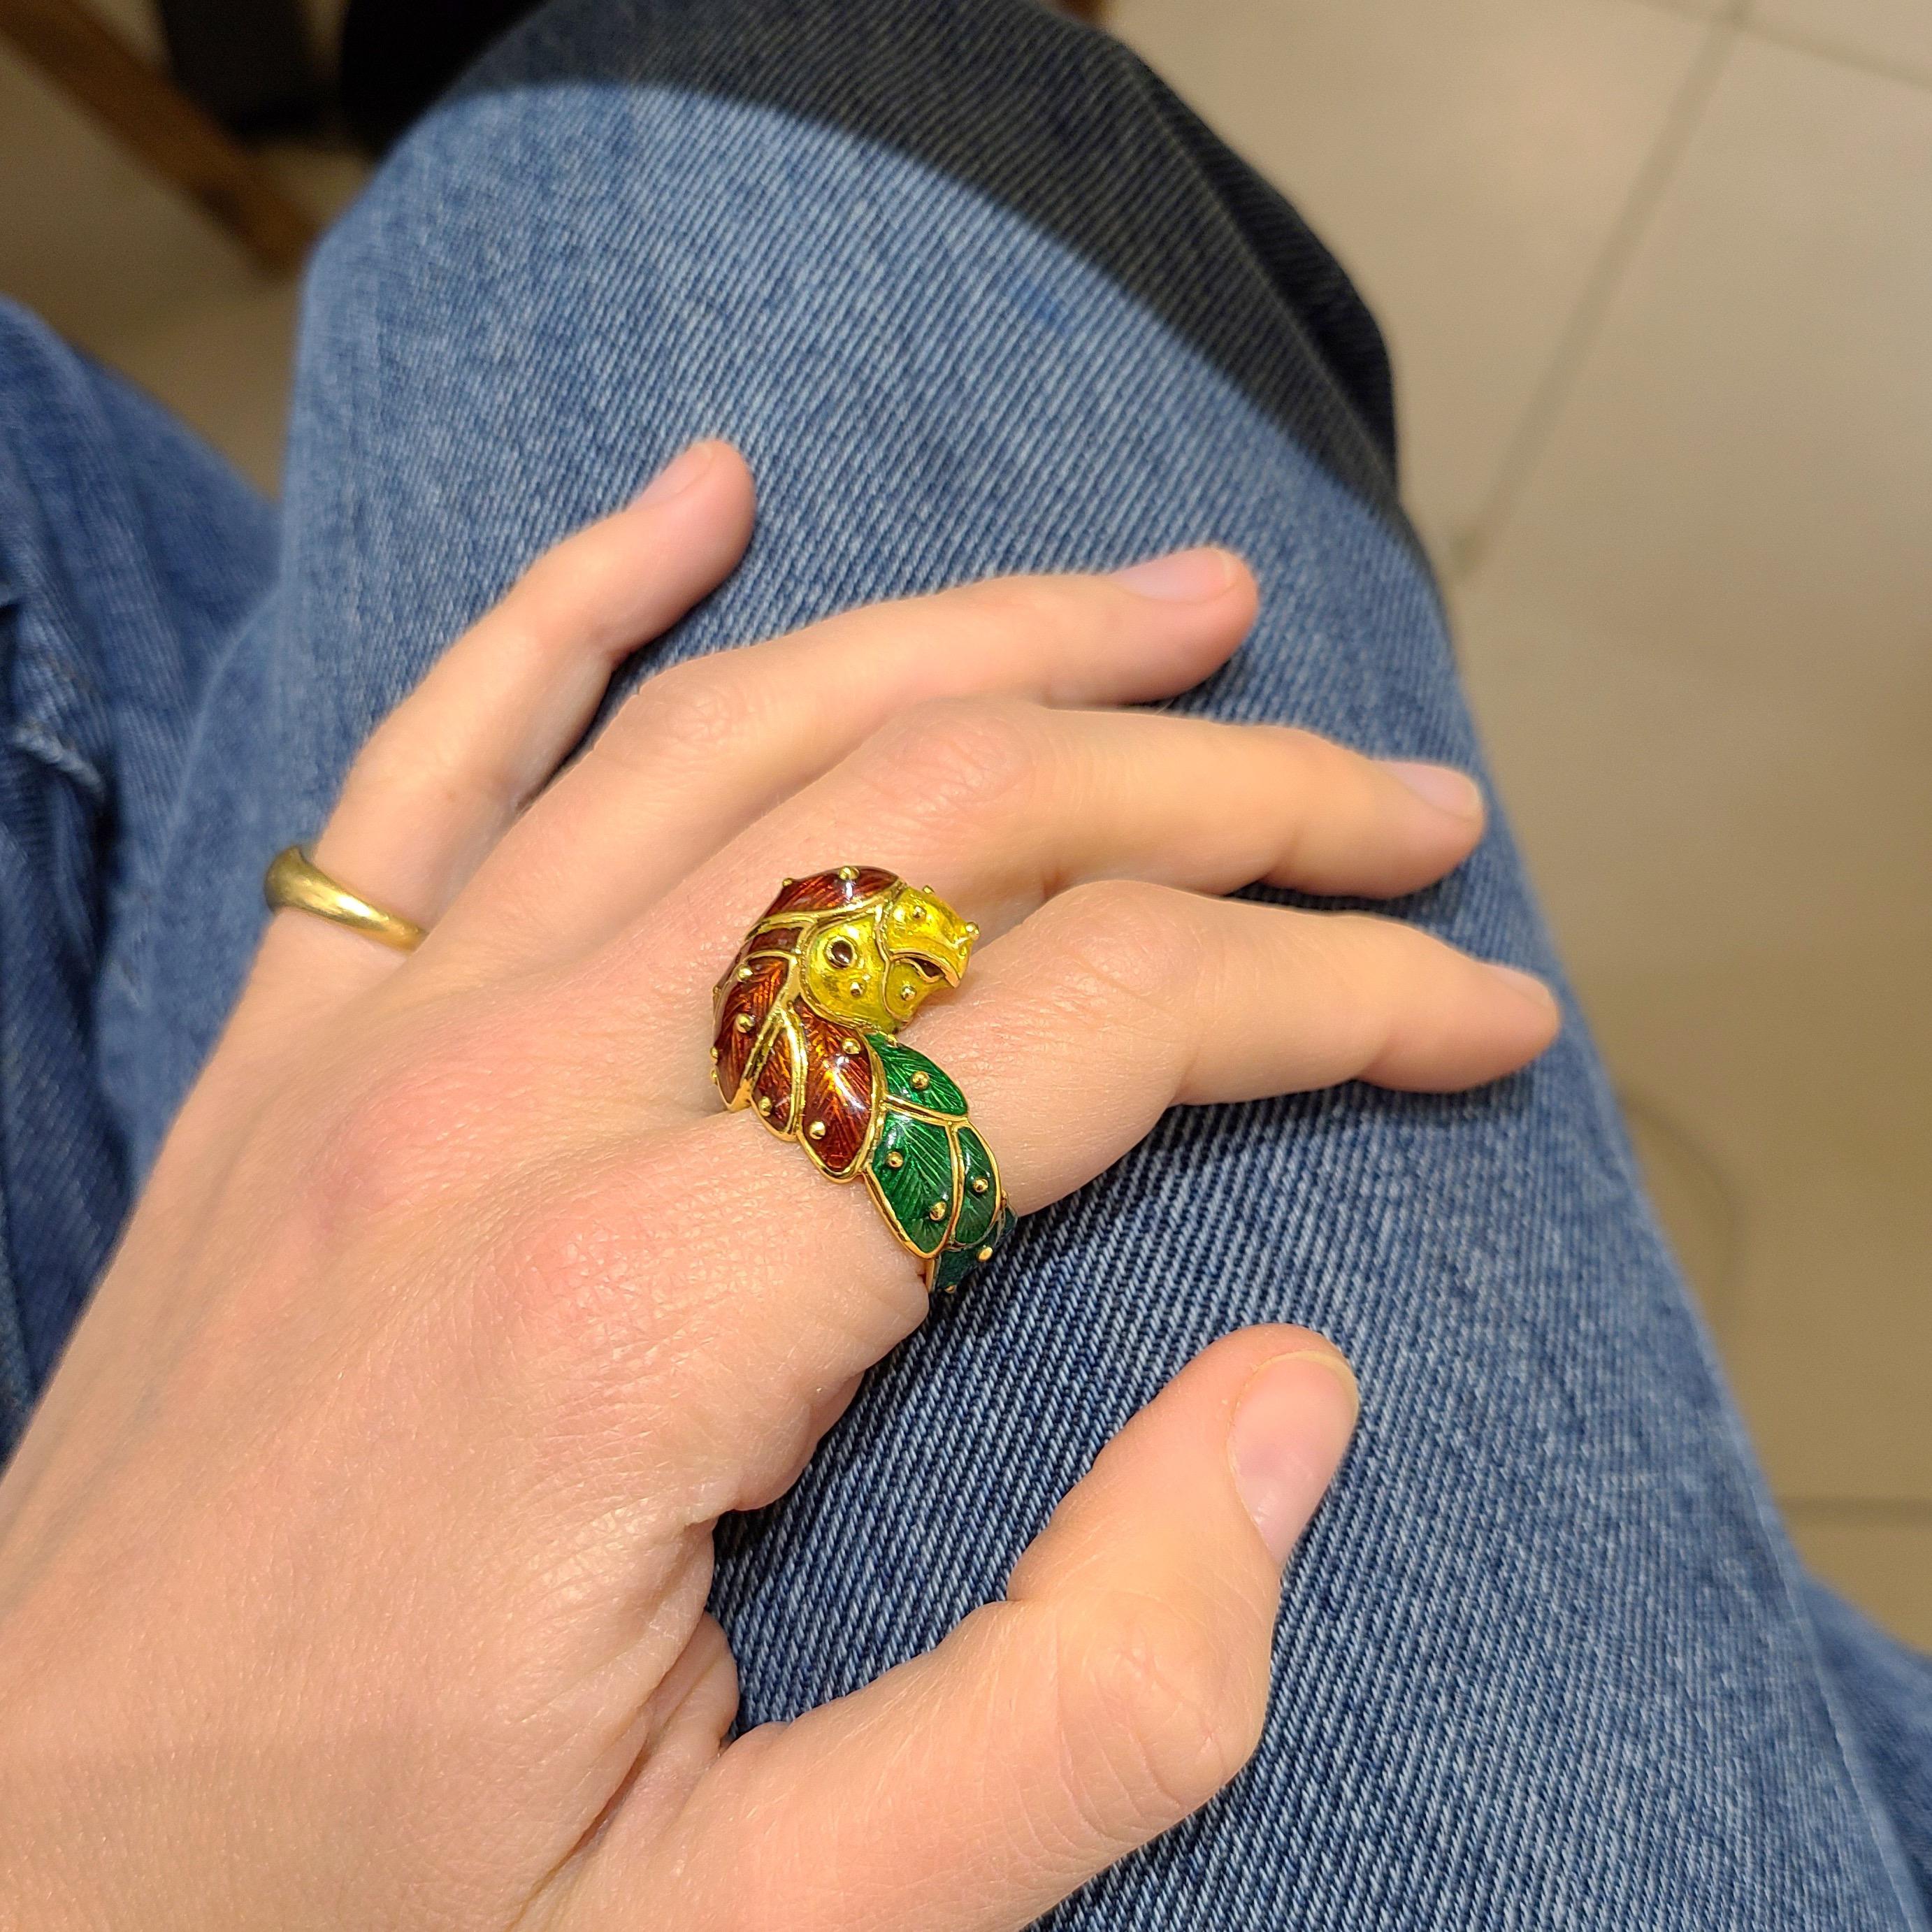 This 18 karat yellow gold parrot ring was designed by Hidalgo. The company is most noted for their beautiful enamel work. This ring is the perfect example. The parrot is crafted with red and green enamel for the feathers and yellow enamel for his